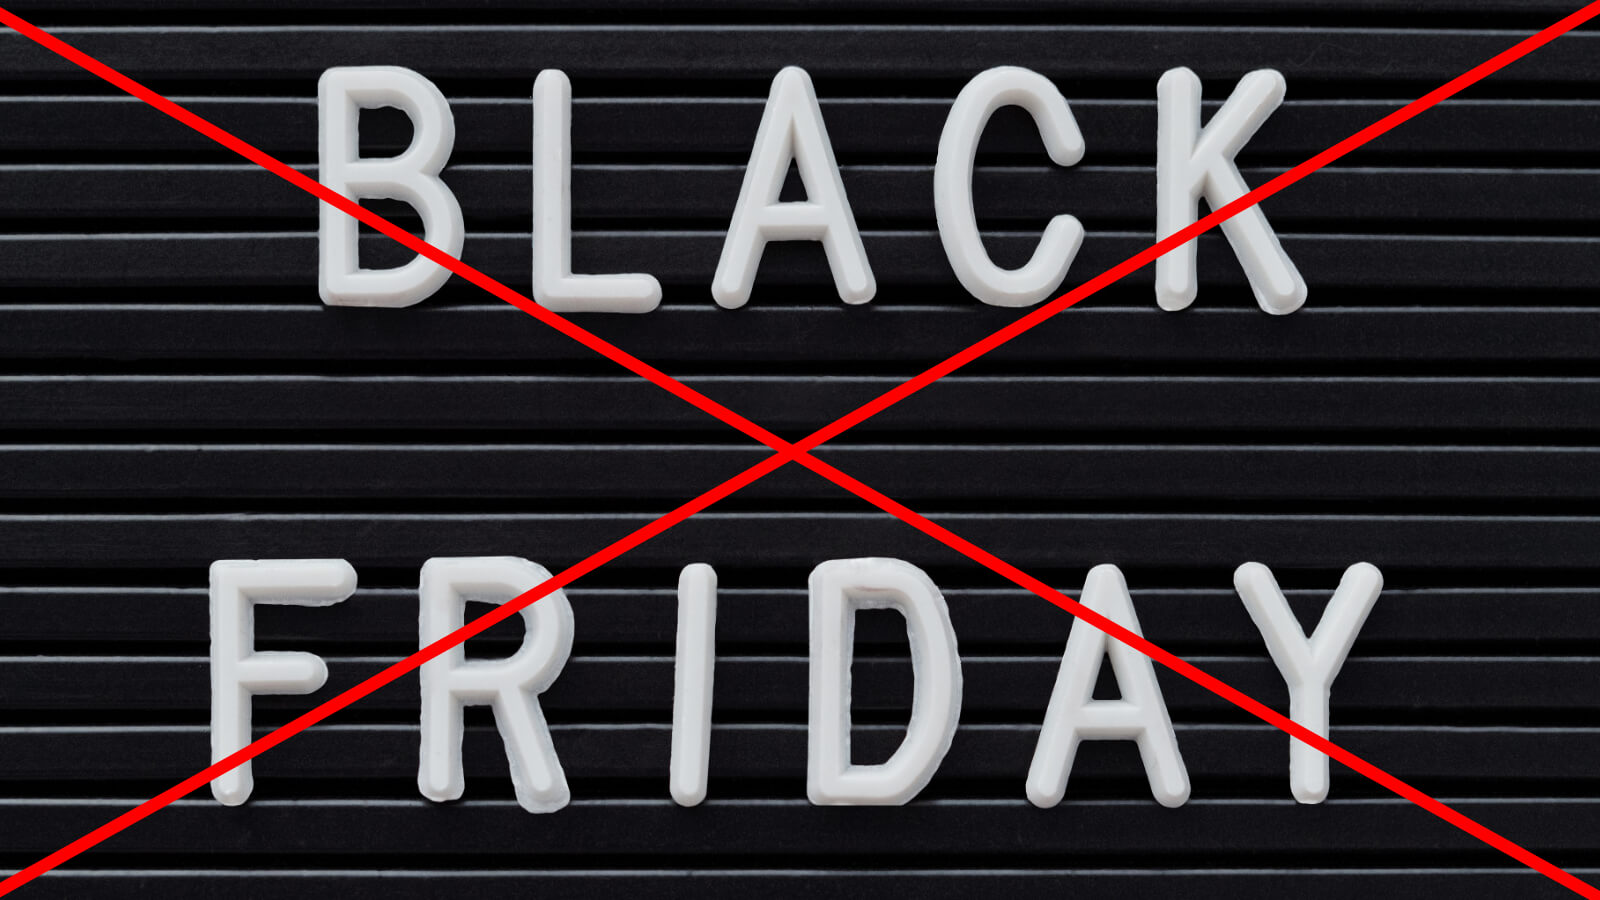 Unsere Black Friday Tradition: Kein Black Friday!